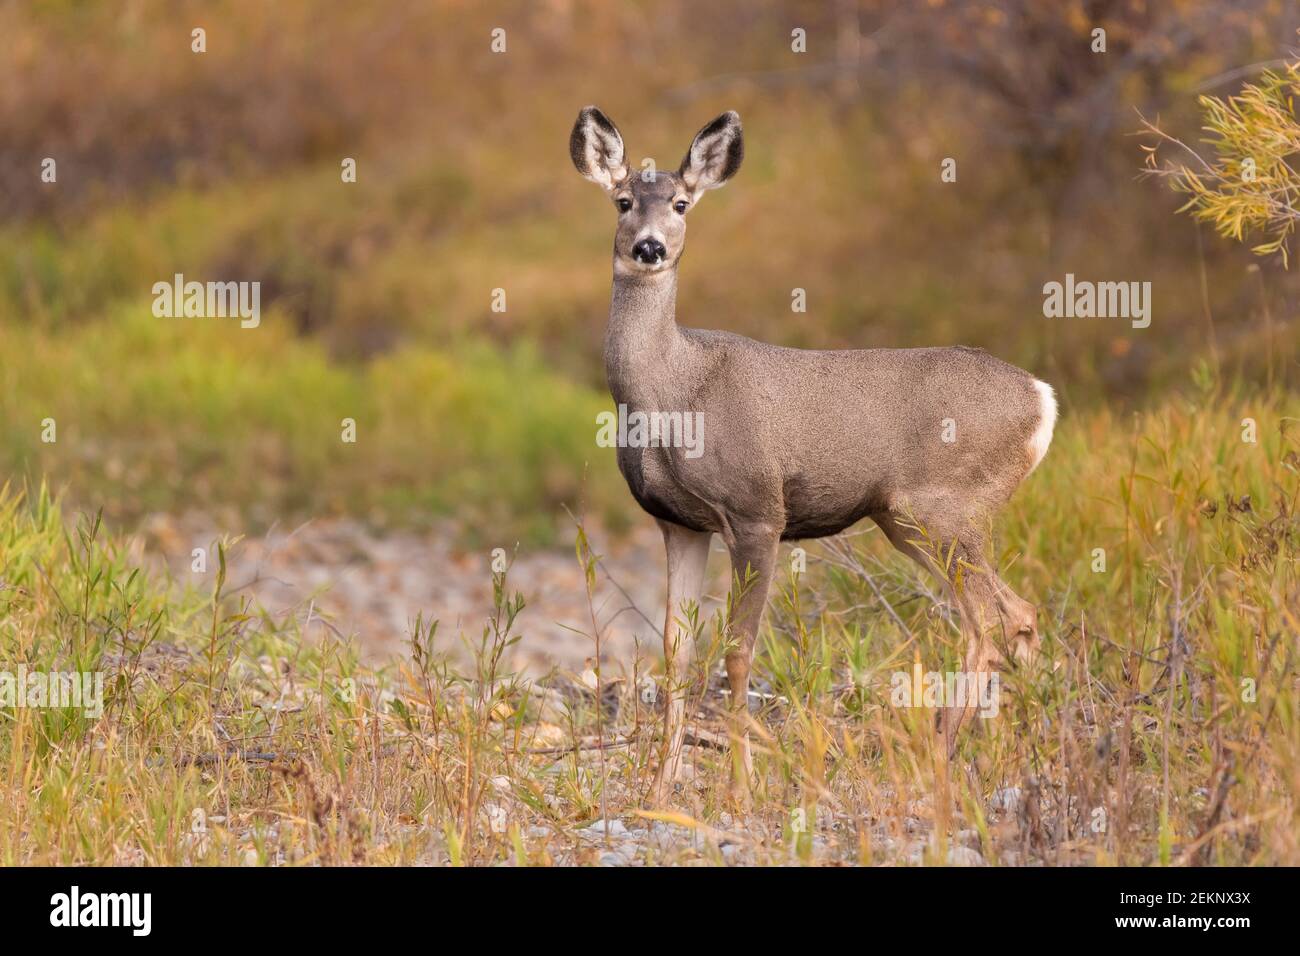 Mule Deer (female) (Odocoileus hemionus) with long ears alert between tall grass and shrubs during fall with yellow and green foliage Stock Photo